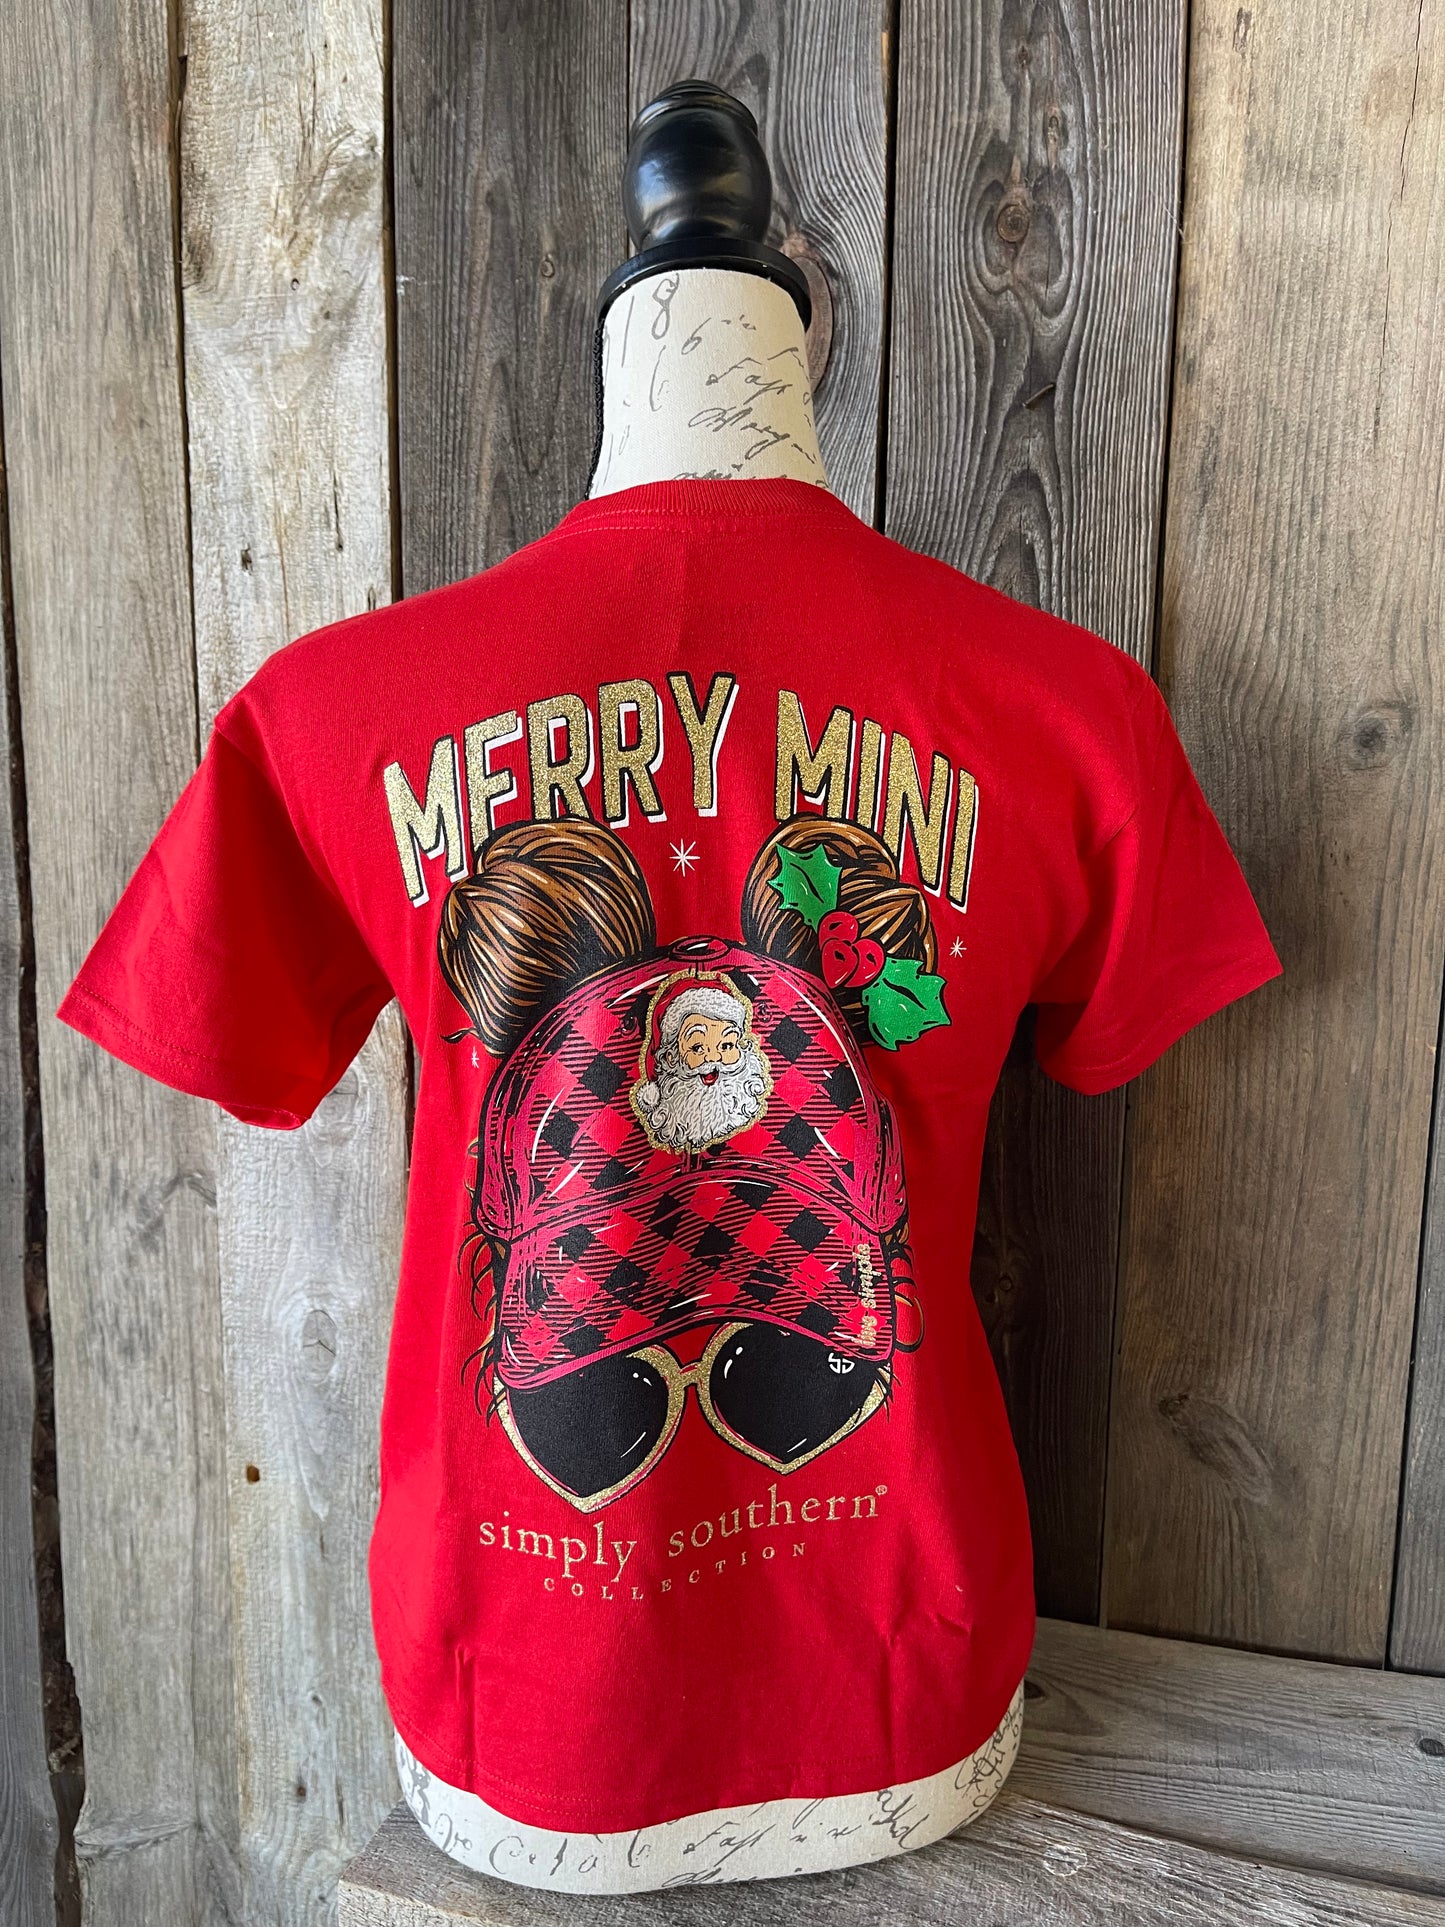 YOUTH - Simply Southern - Merry Mini Tee